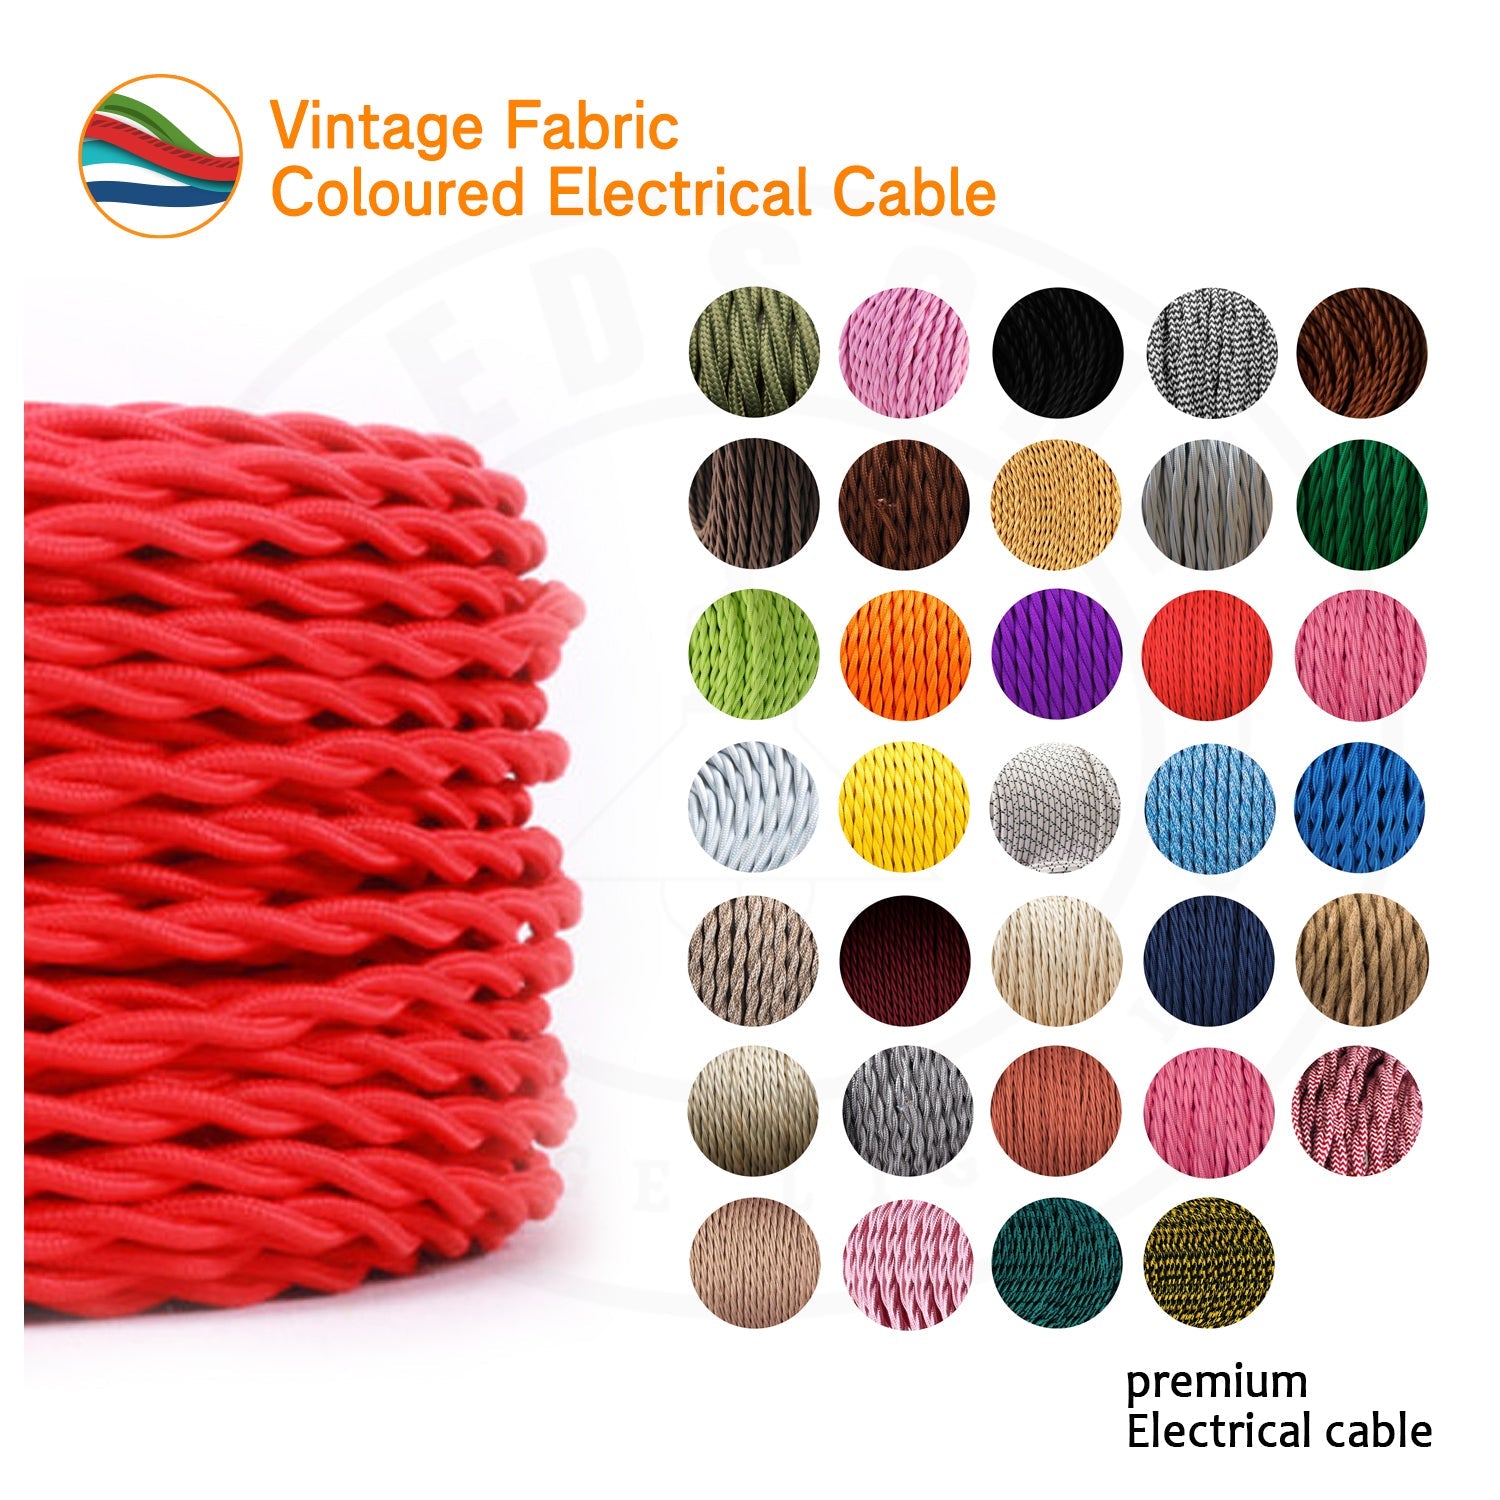 Fabric Coloured Electrical Cable.JPG